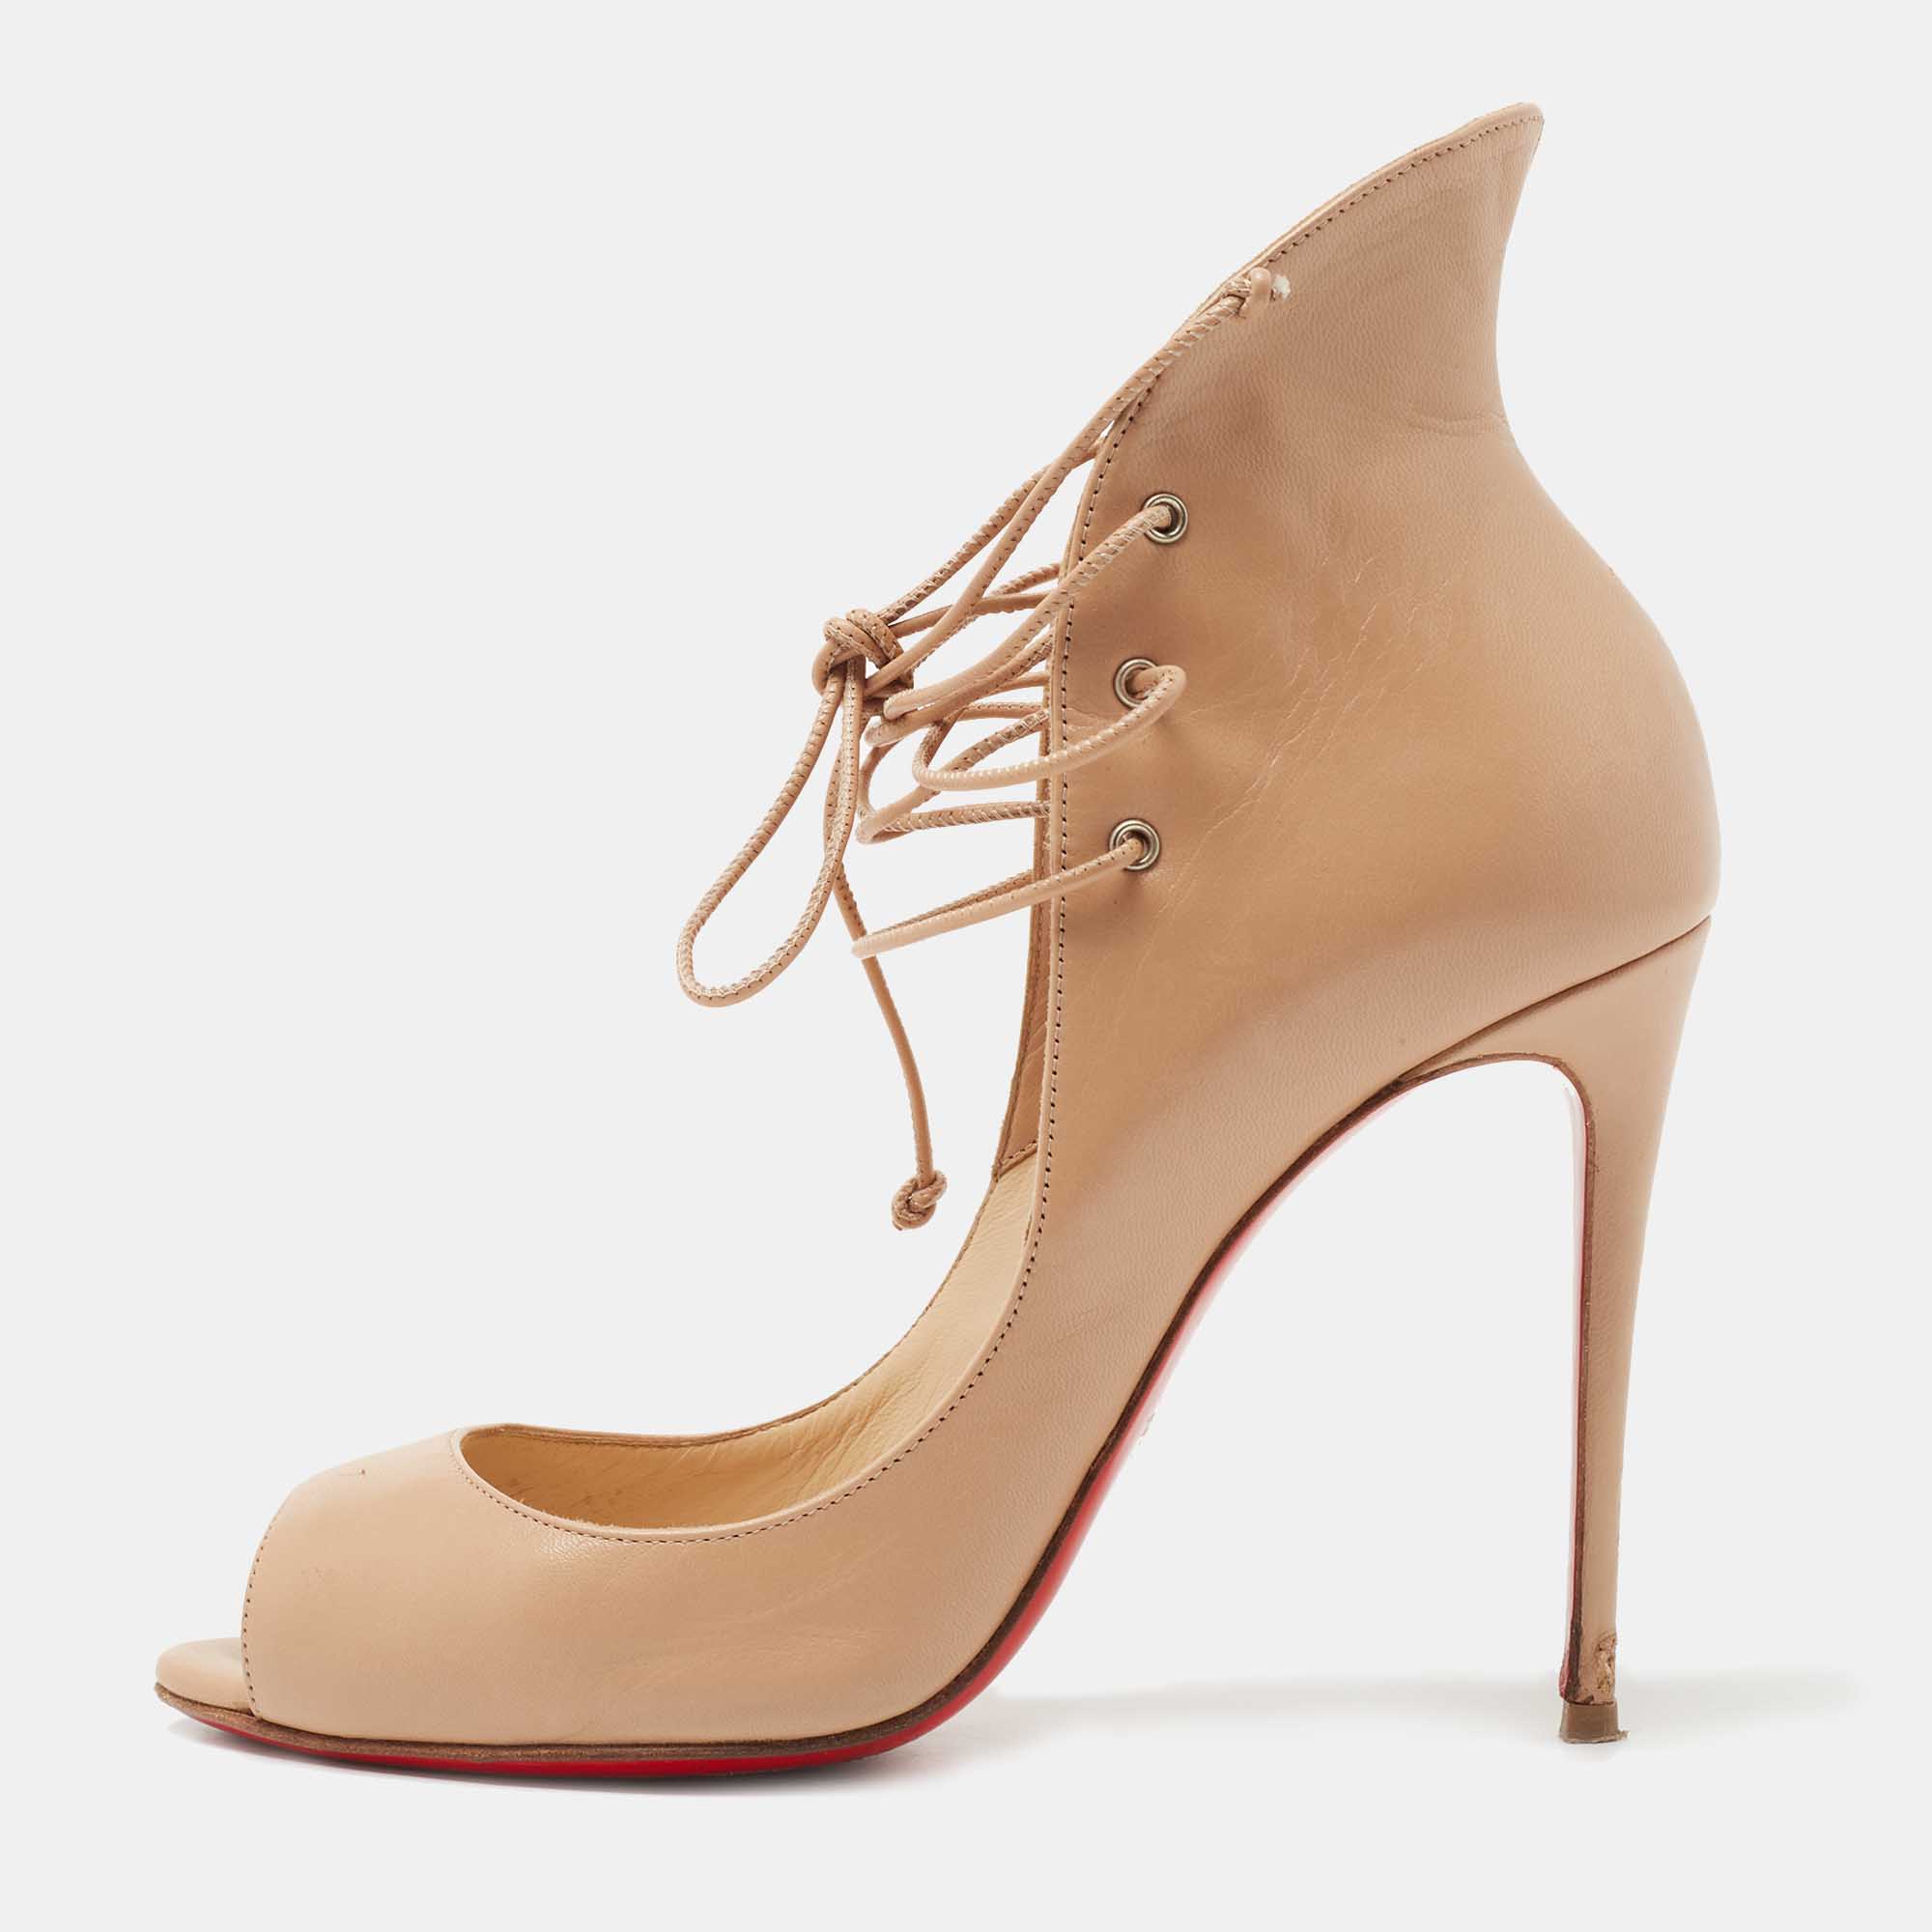 Pre-owned Christian Louboutin Beige Leather Megavamp Ankle Tie Pumps Size 37